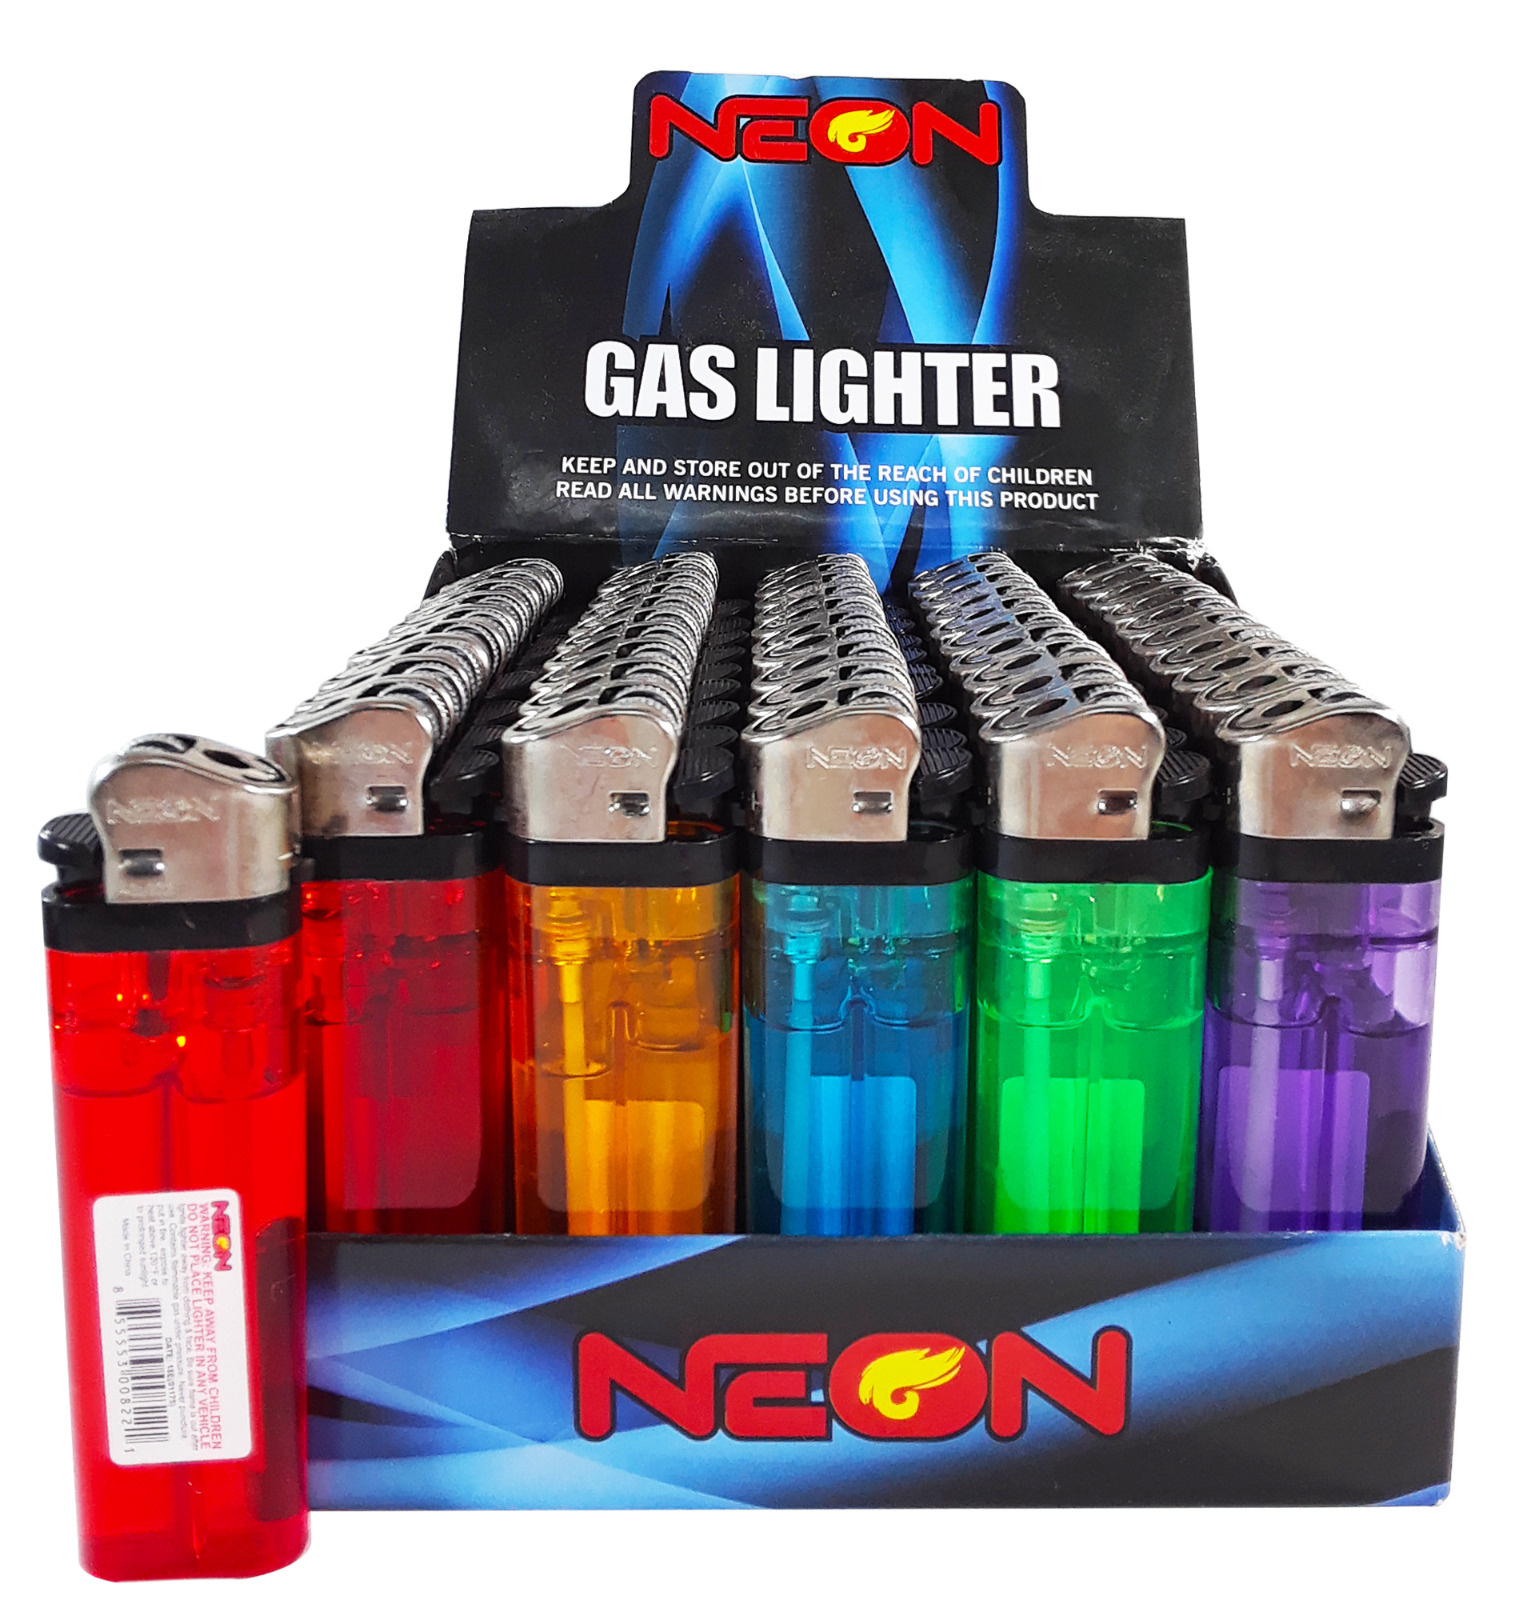 50 NEON FULL SIZE DISPOSABLE BUTANE GAS LIGHTERS